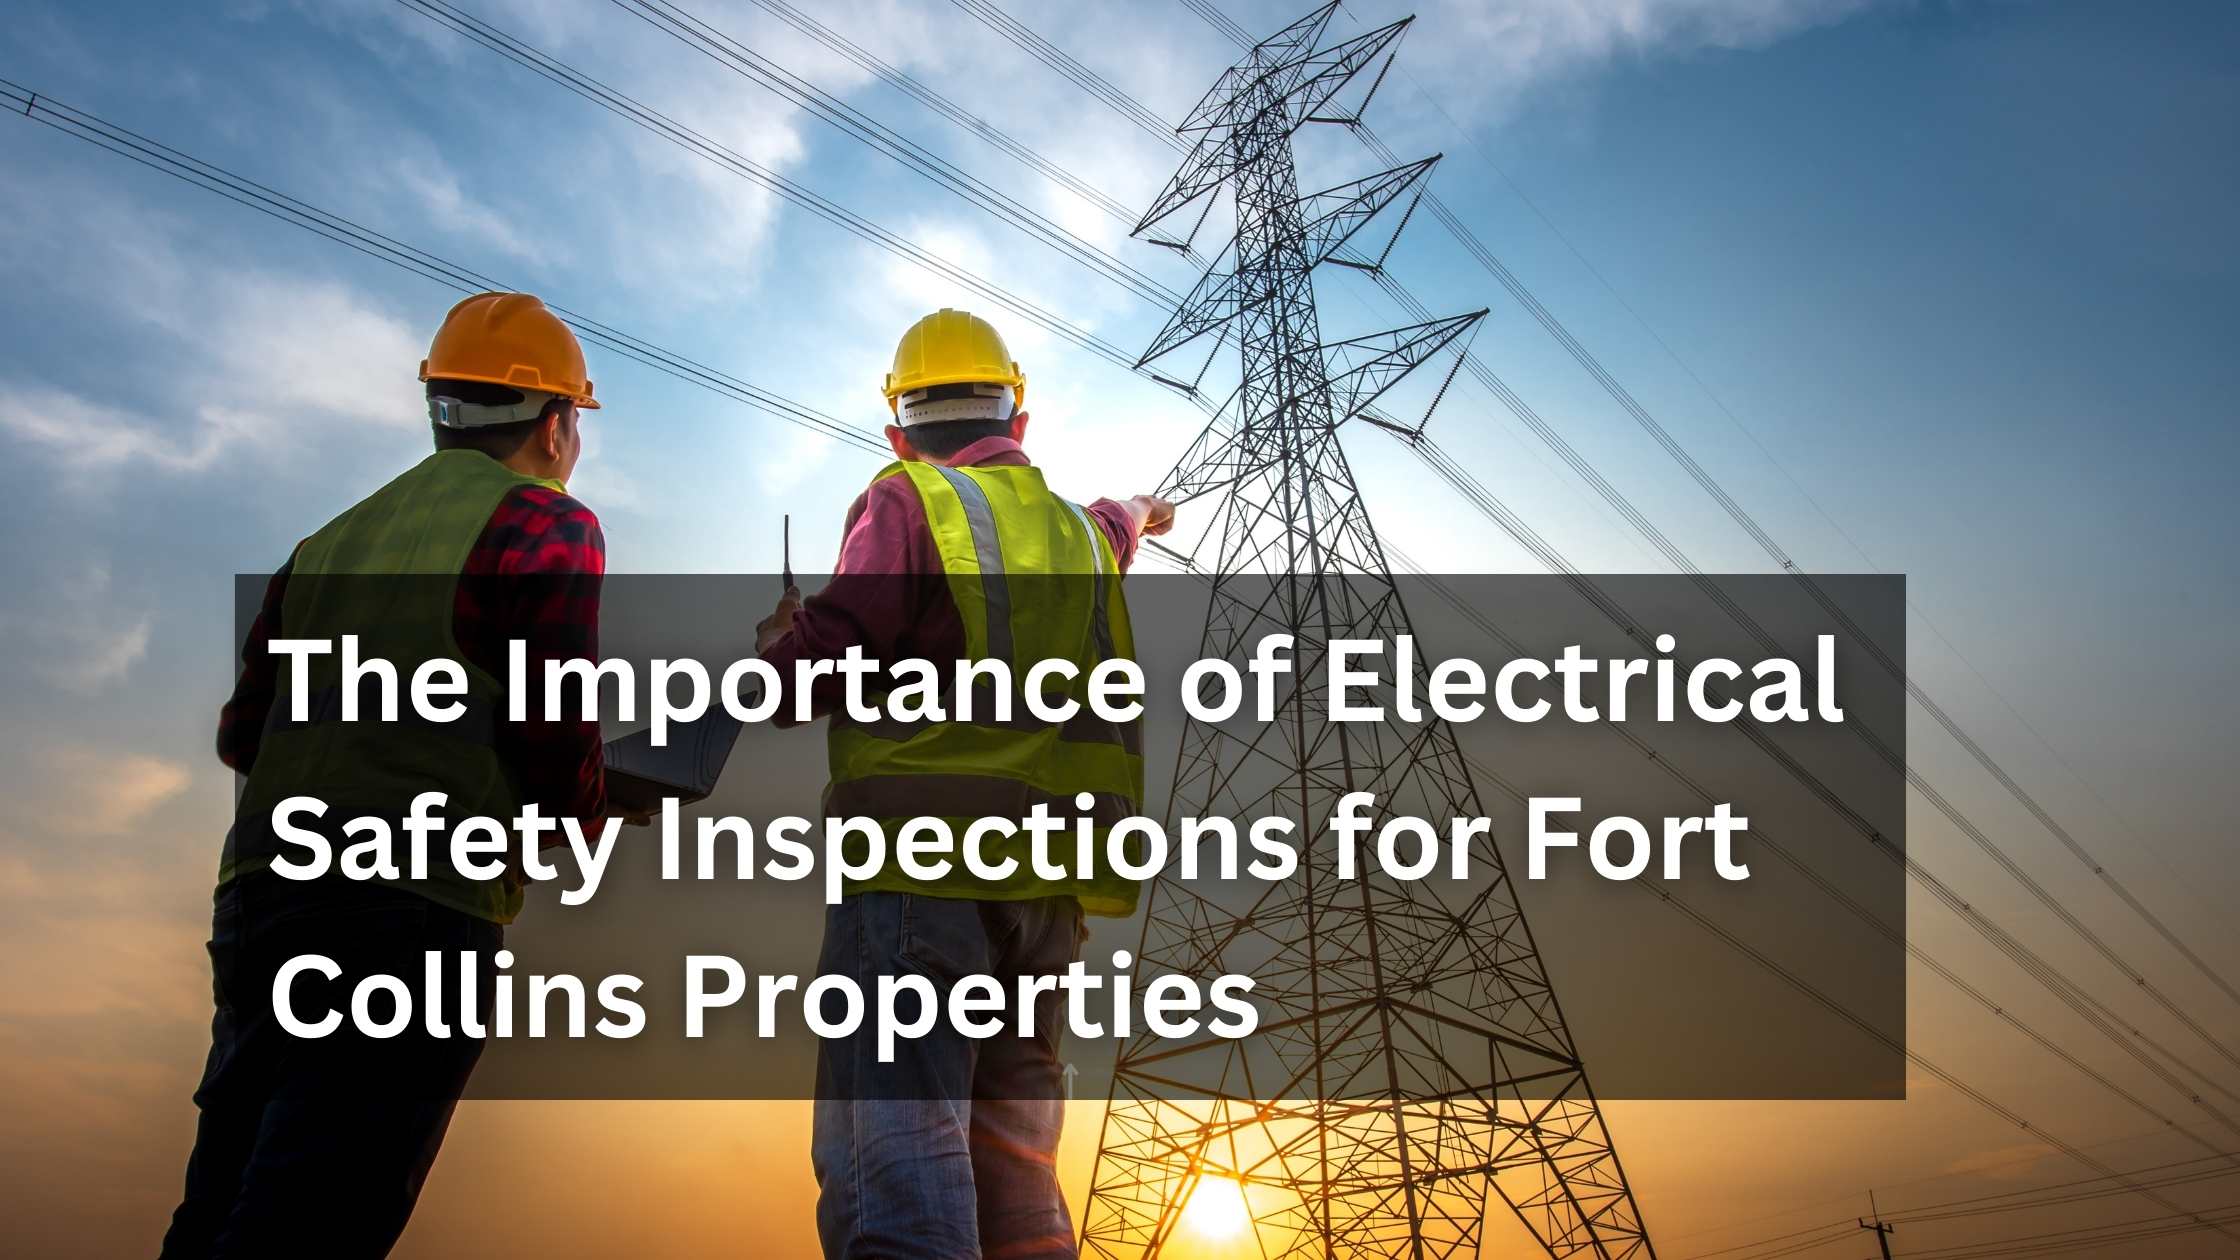 The Importance of Electrical Safety Inspections for Fort Collins Properties